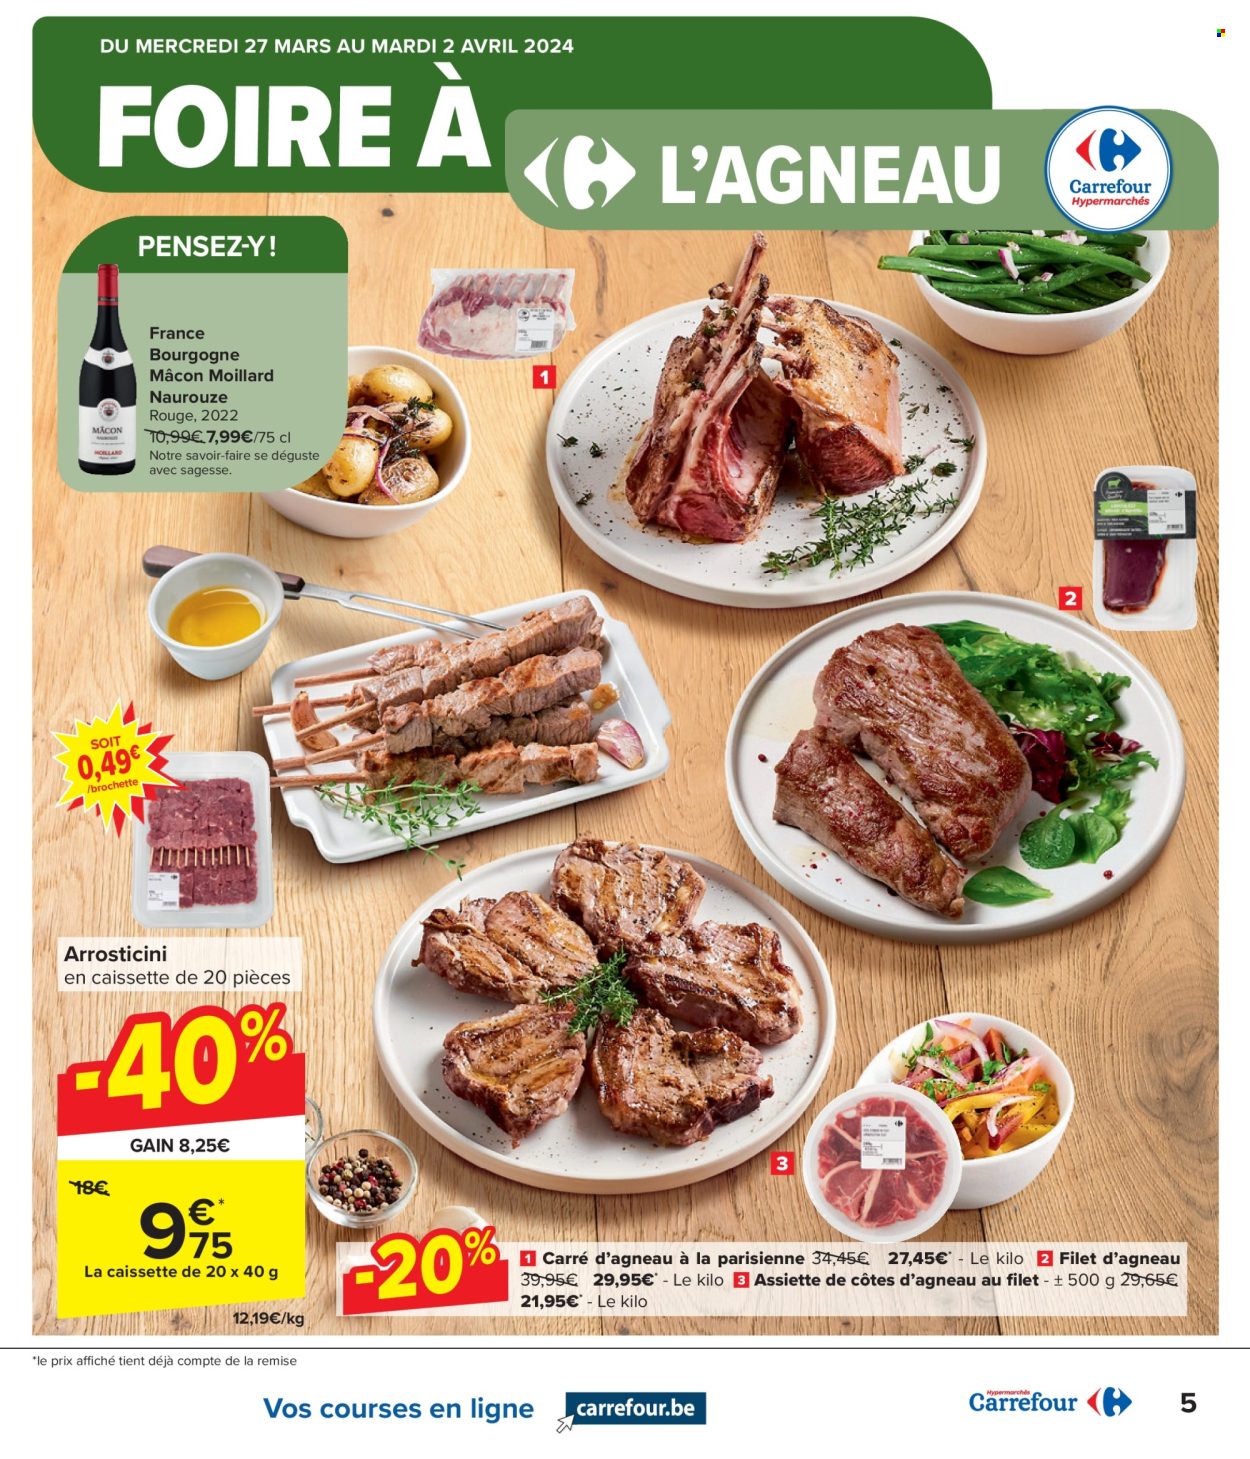 Catalogue Carrefour hypermarkt - 27.3.2024 - 8.4.2024. Page 5.